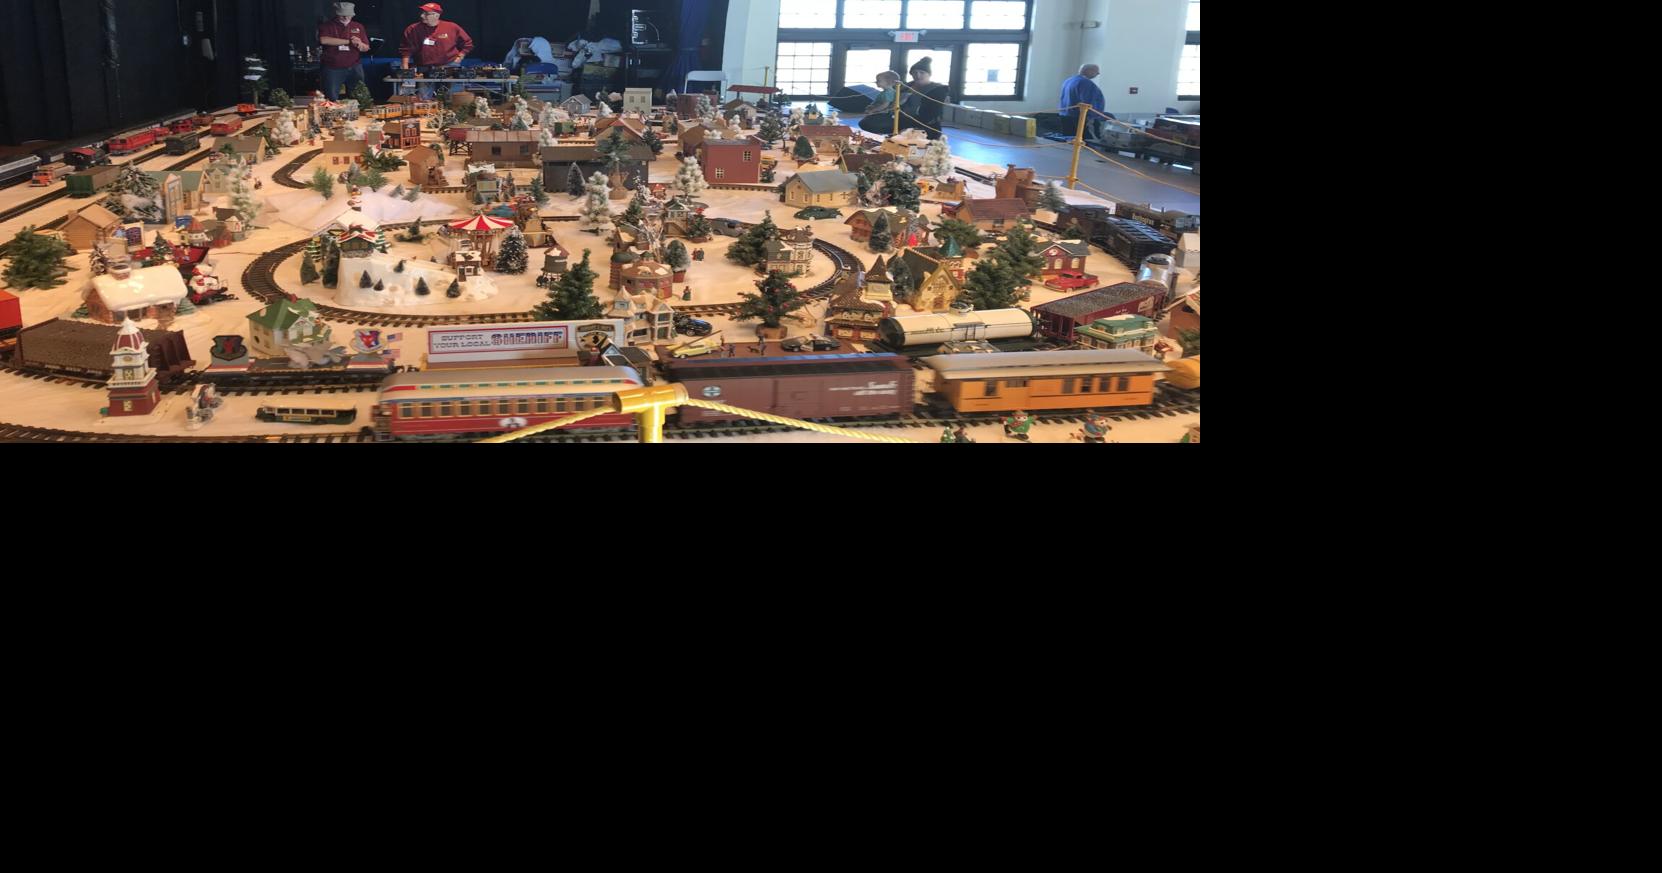 Ocean City Train Show gets back on track